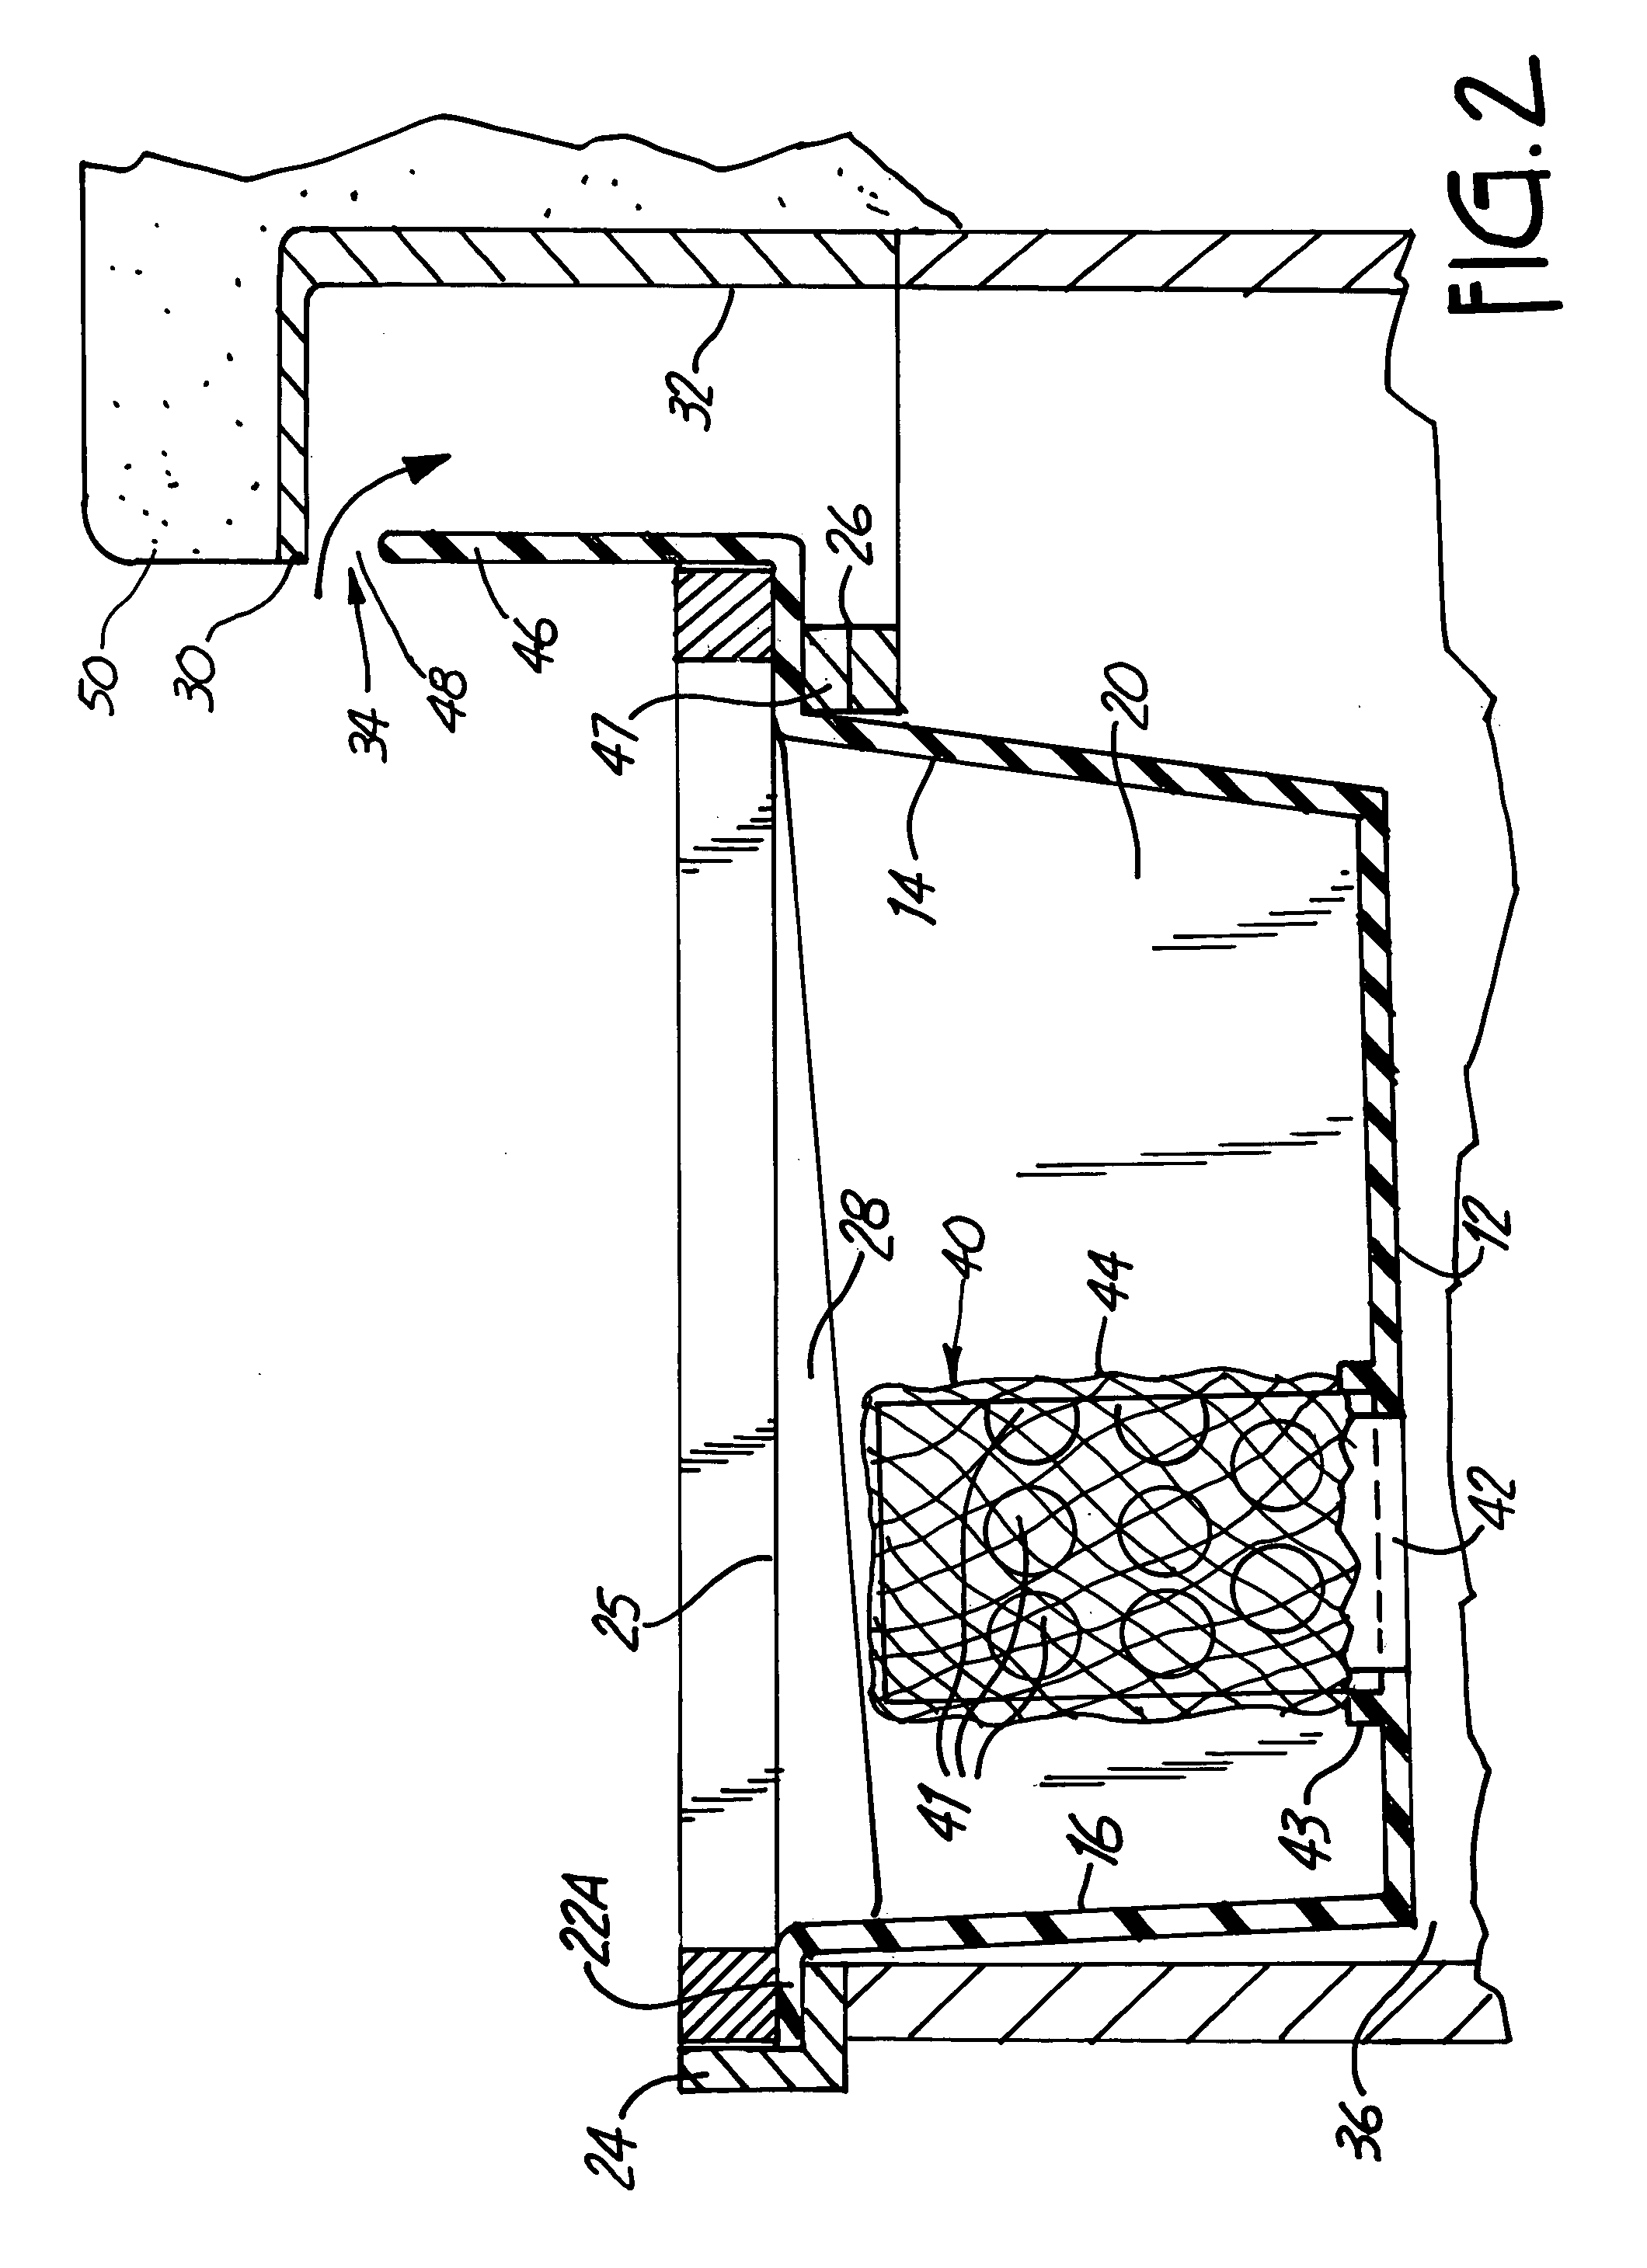 Sediment control drain and method of construction